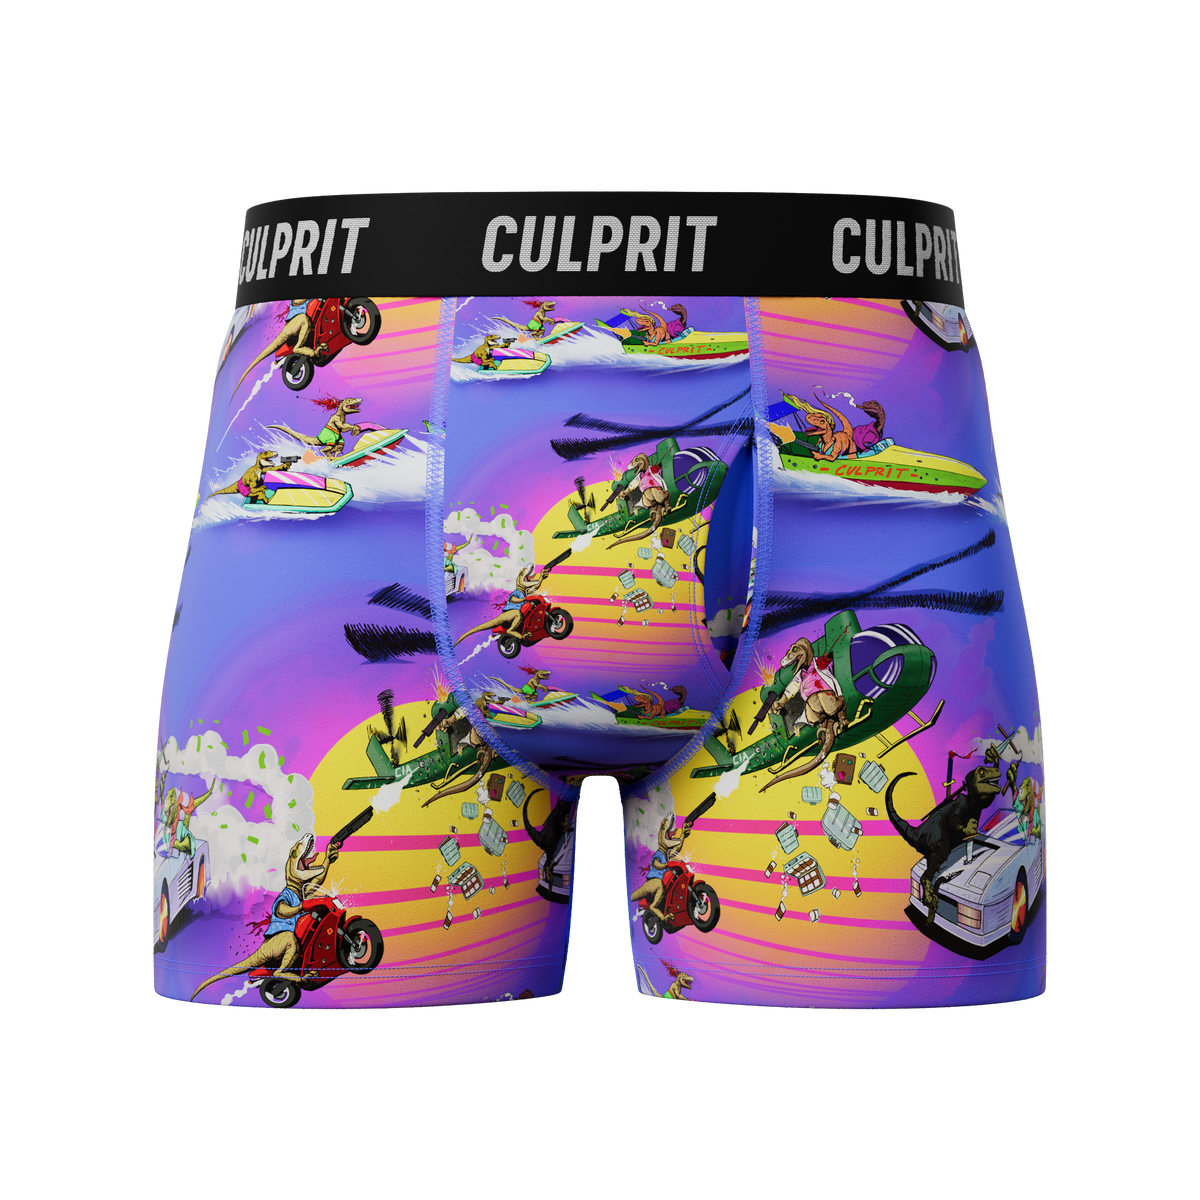 The Birds and The Bees – Culprit Underwear